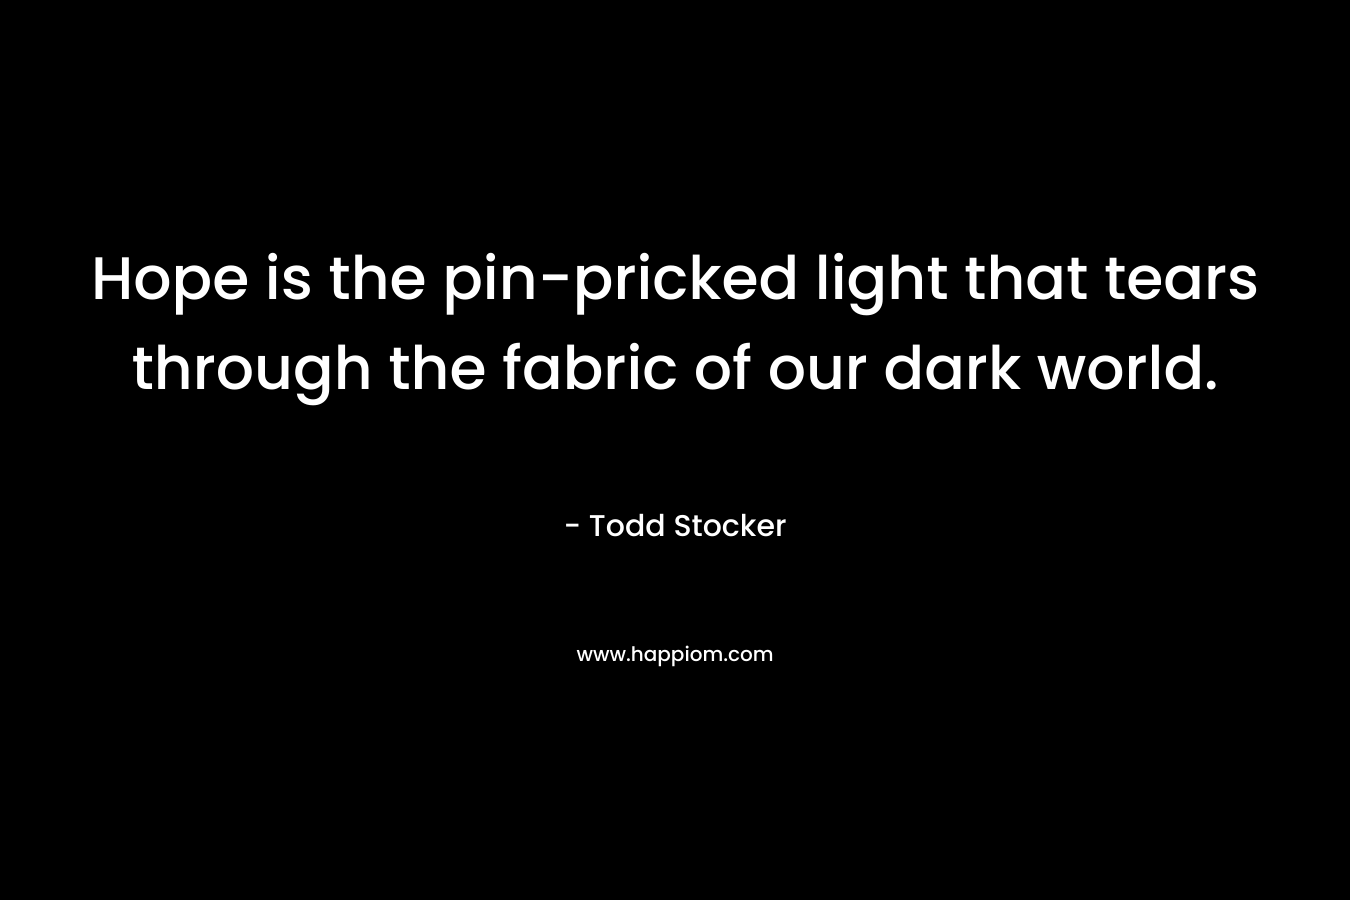 Hope is the pin-pricked light that tears through the fabric of our dark world.